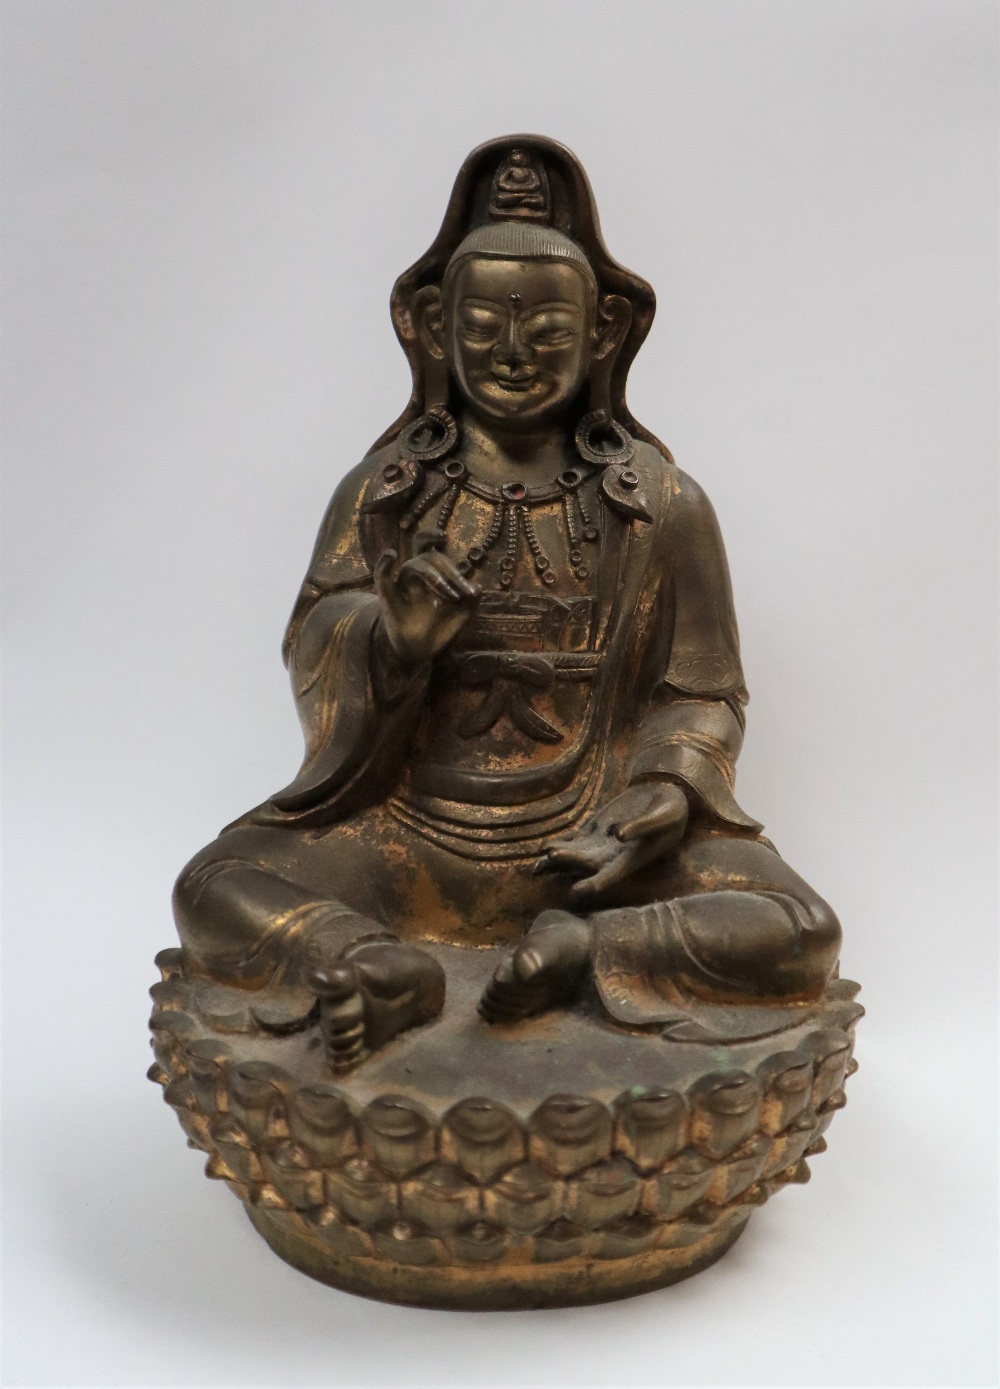 A Bronze figure of Quan yin, seated with right hand raised and left hand resting on her leg,